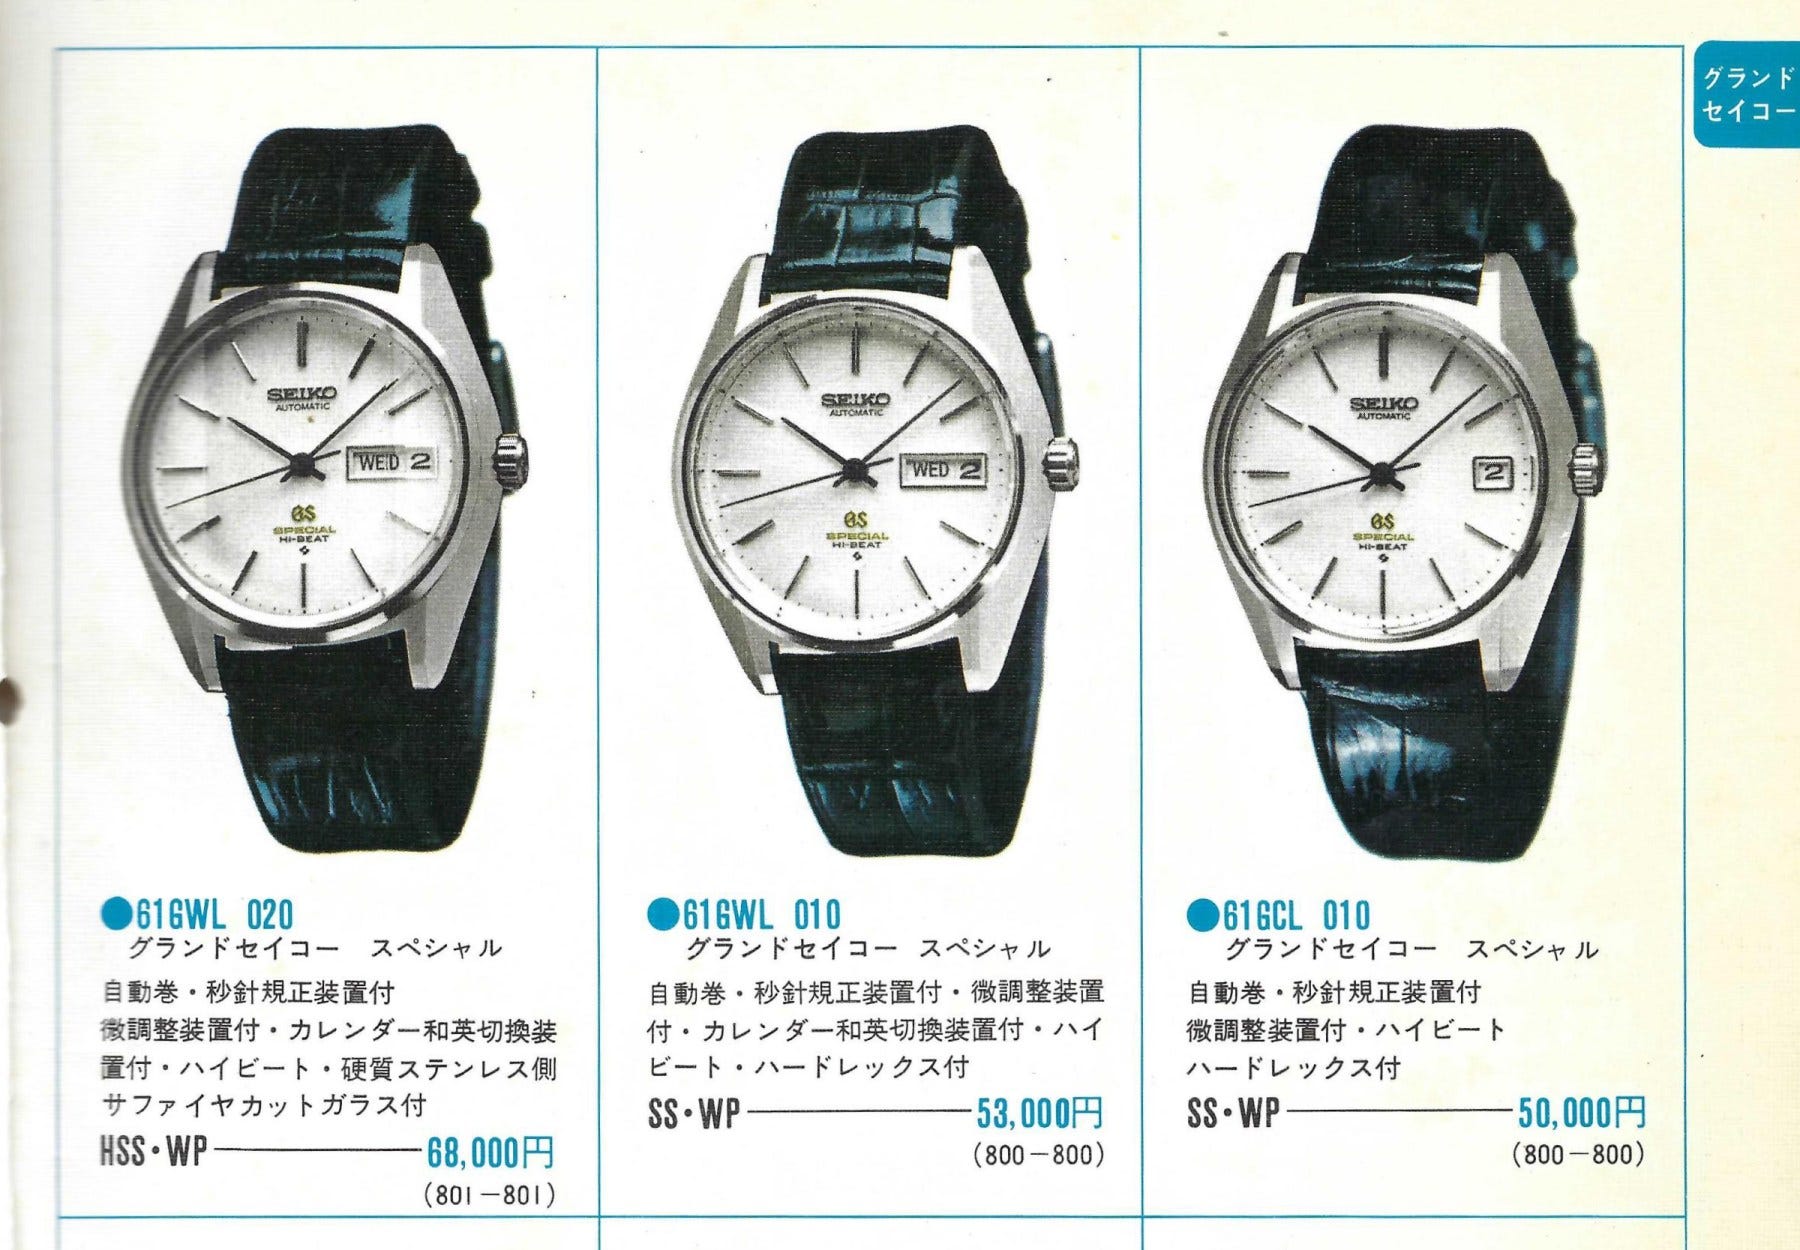 Watches for sale - April/May 2022 - the Grand Seiko guy